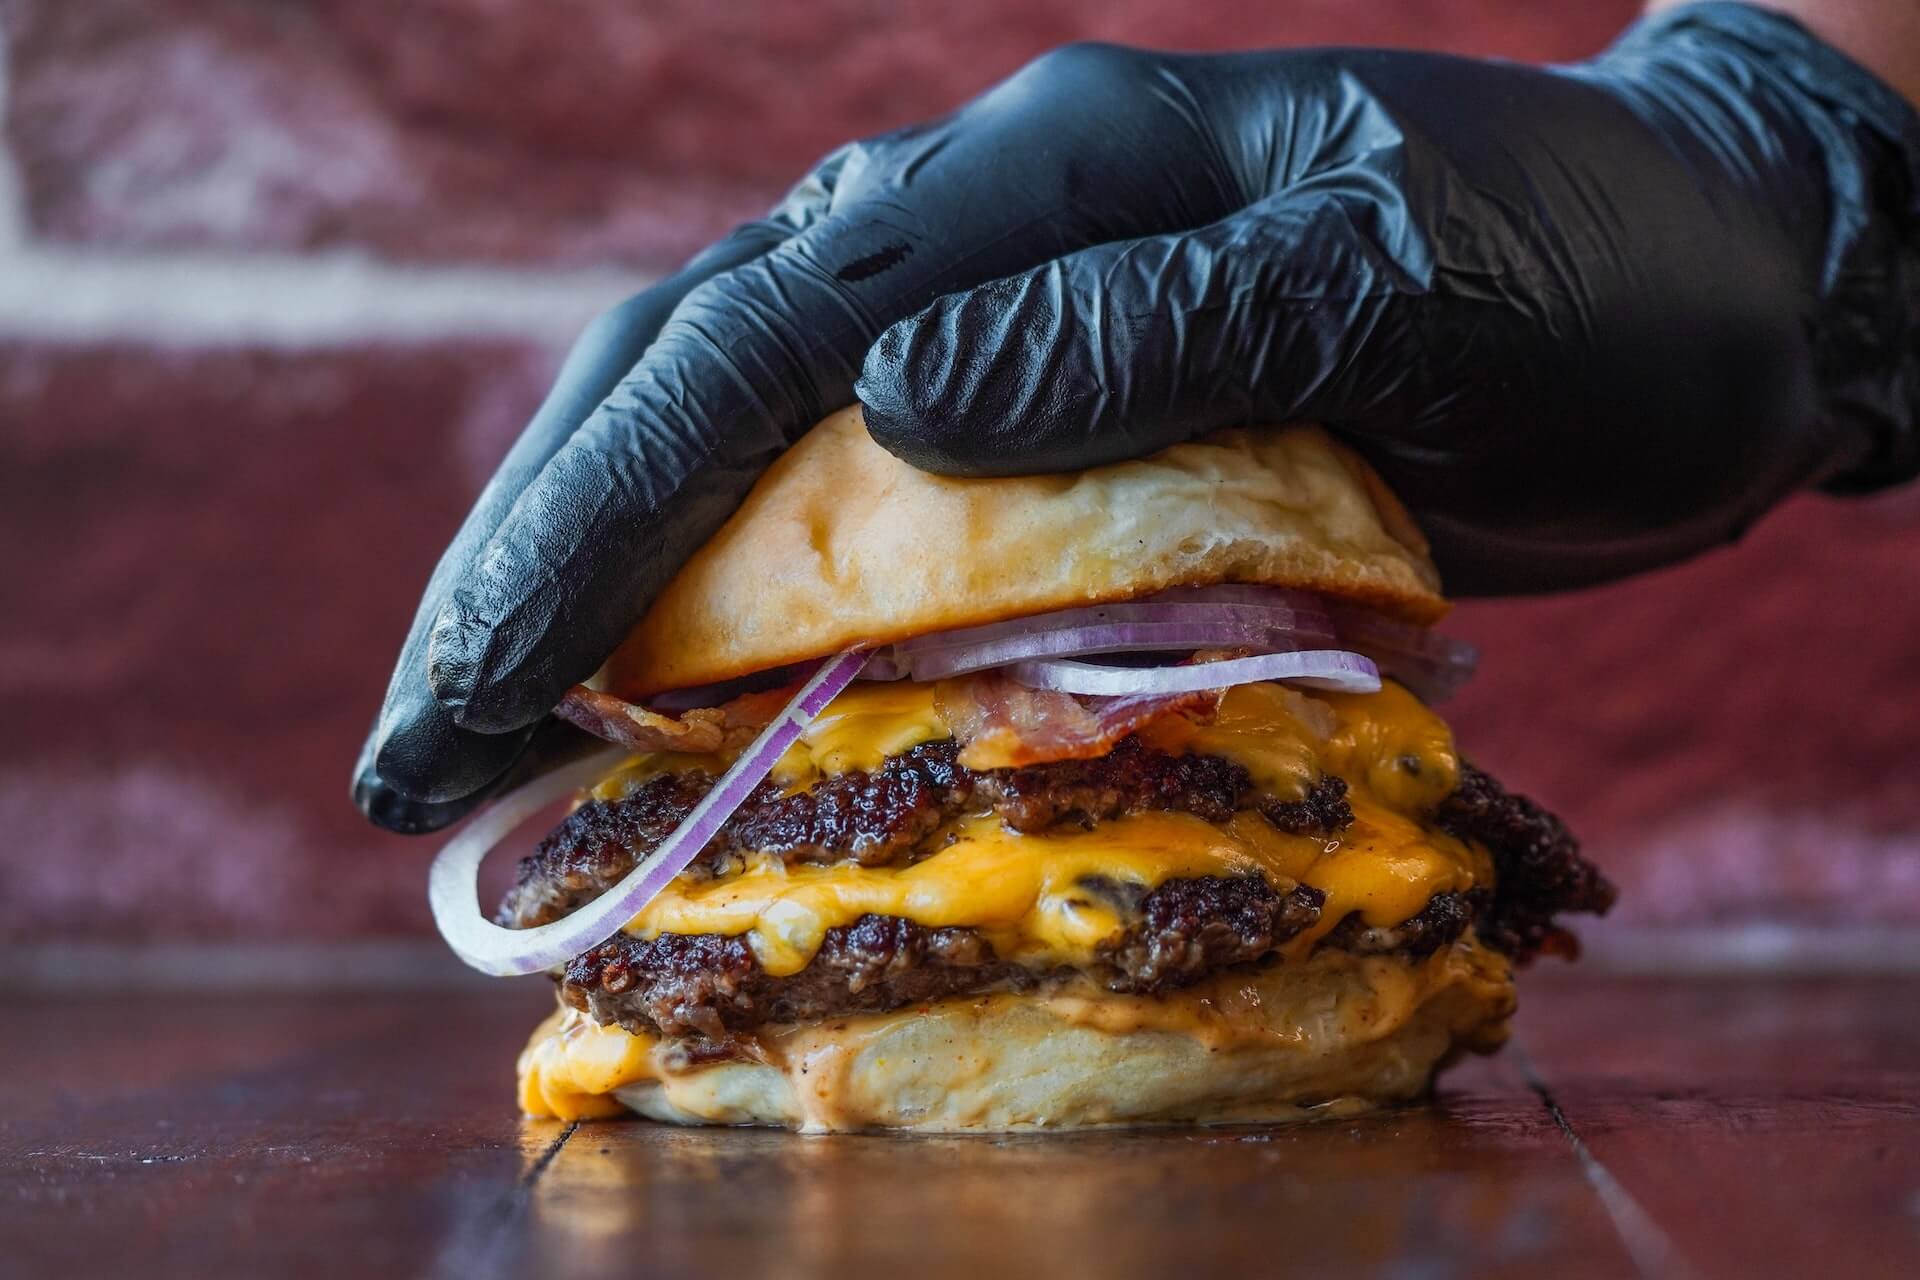 Gloved hand pressing down on cheeseburger